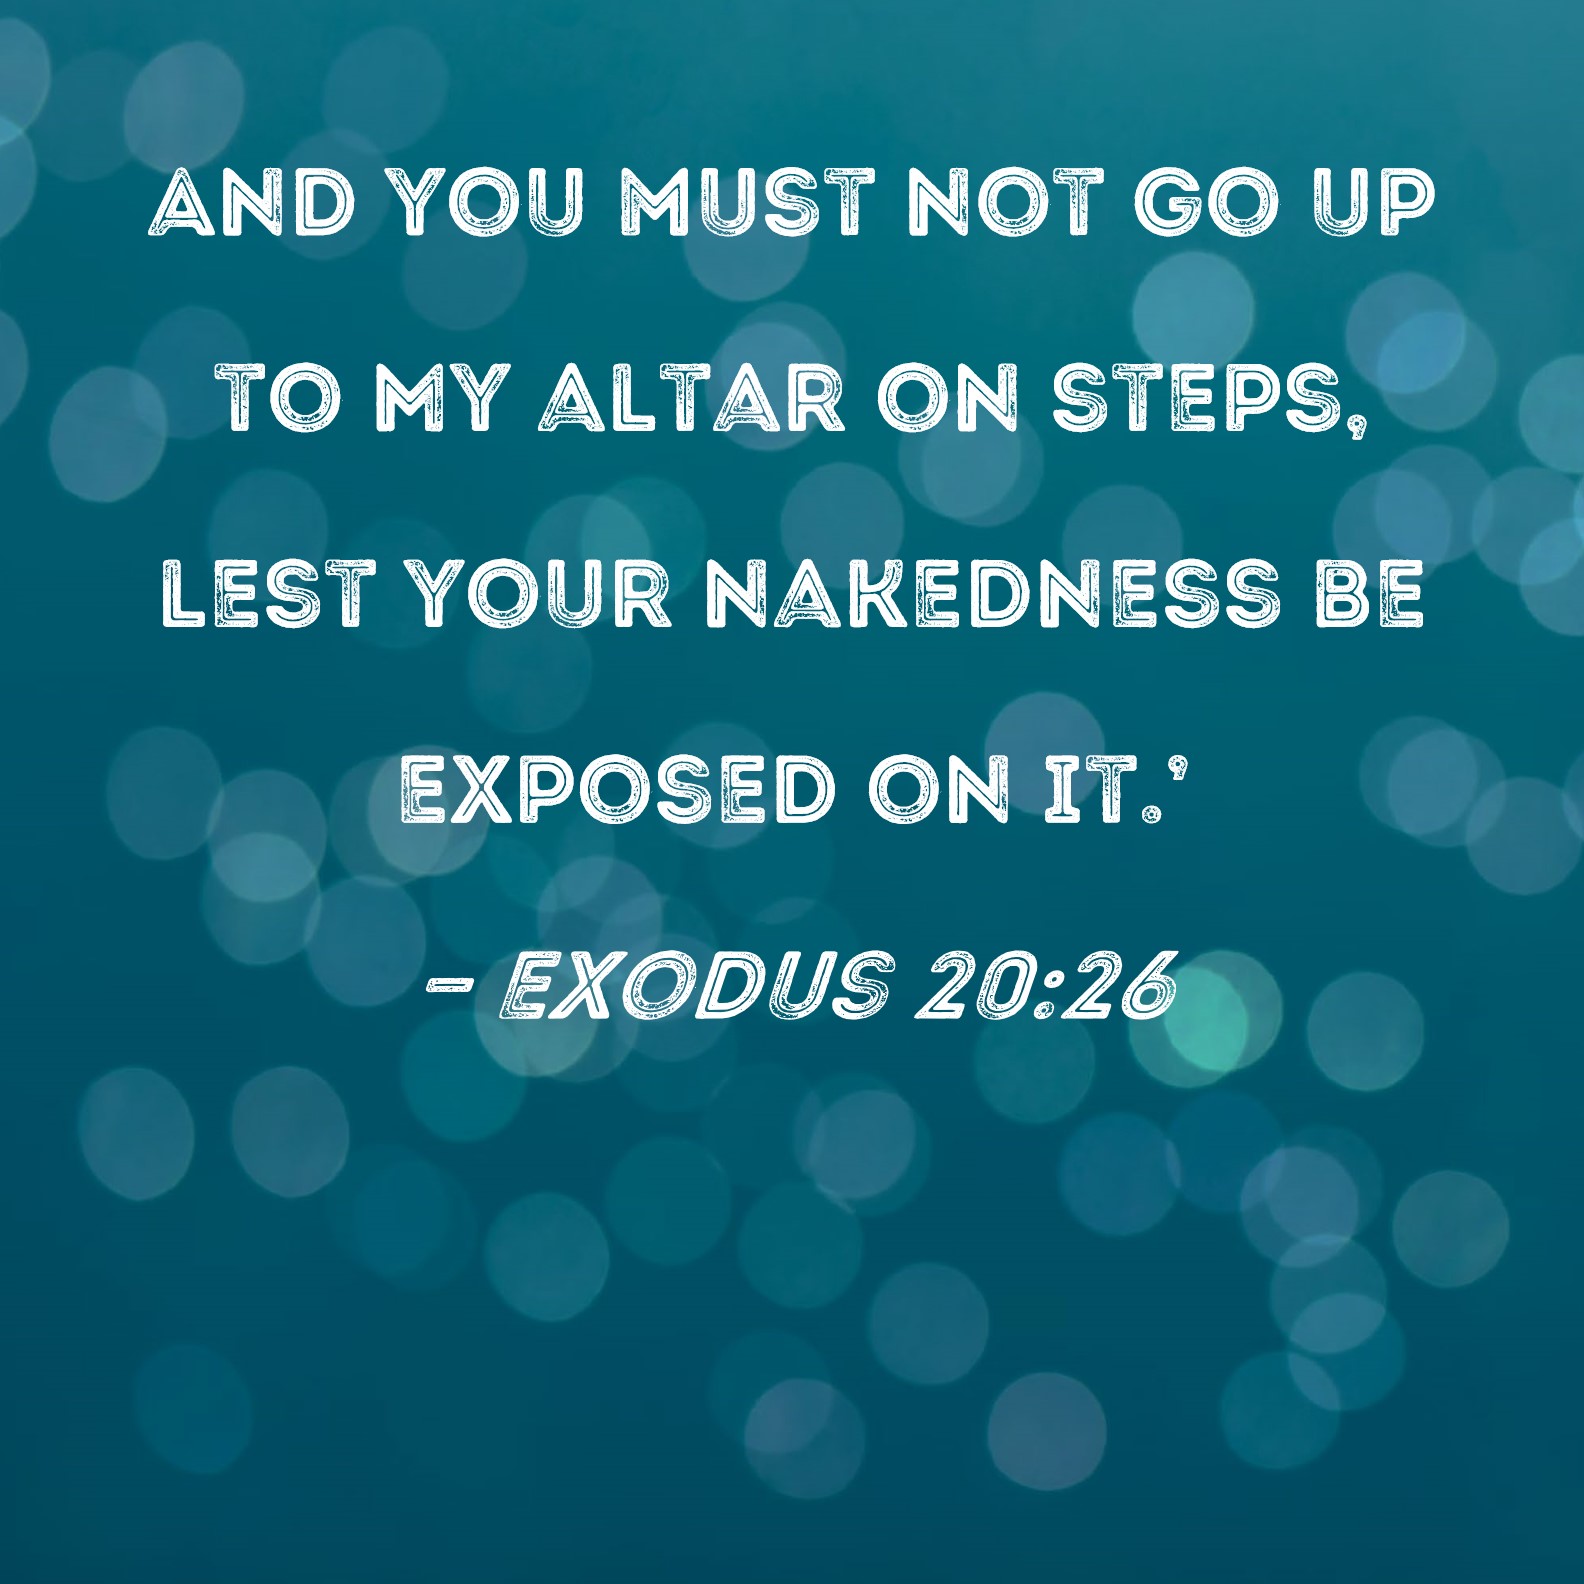 Exodus 2026 And You Must Not Go Up To My Altar On Steps Lest Your